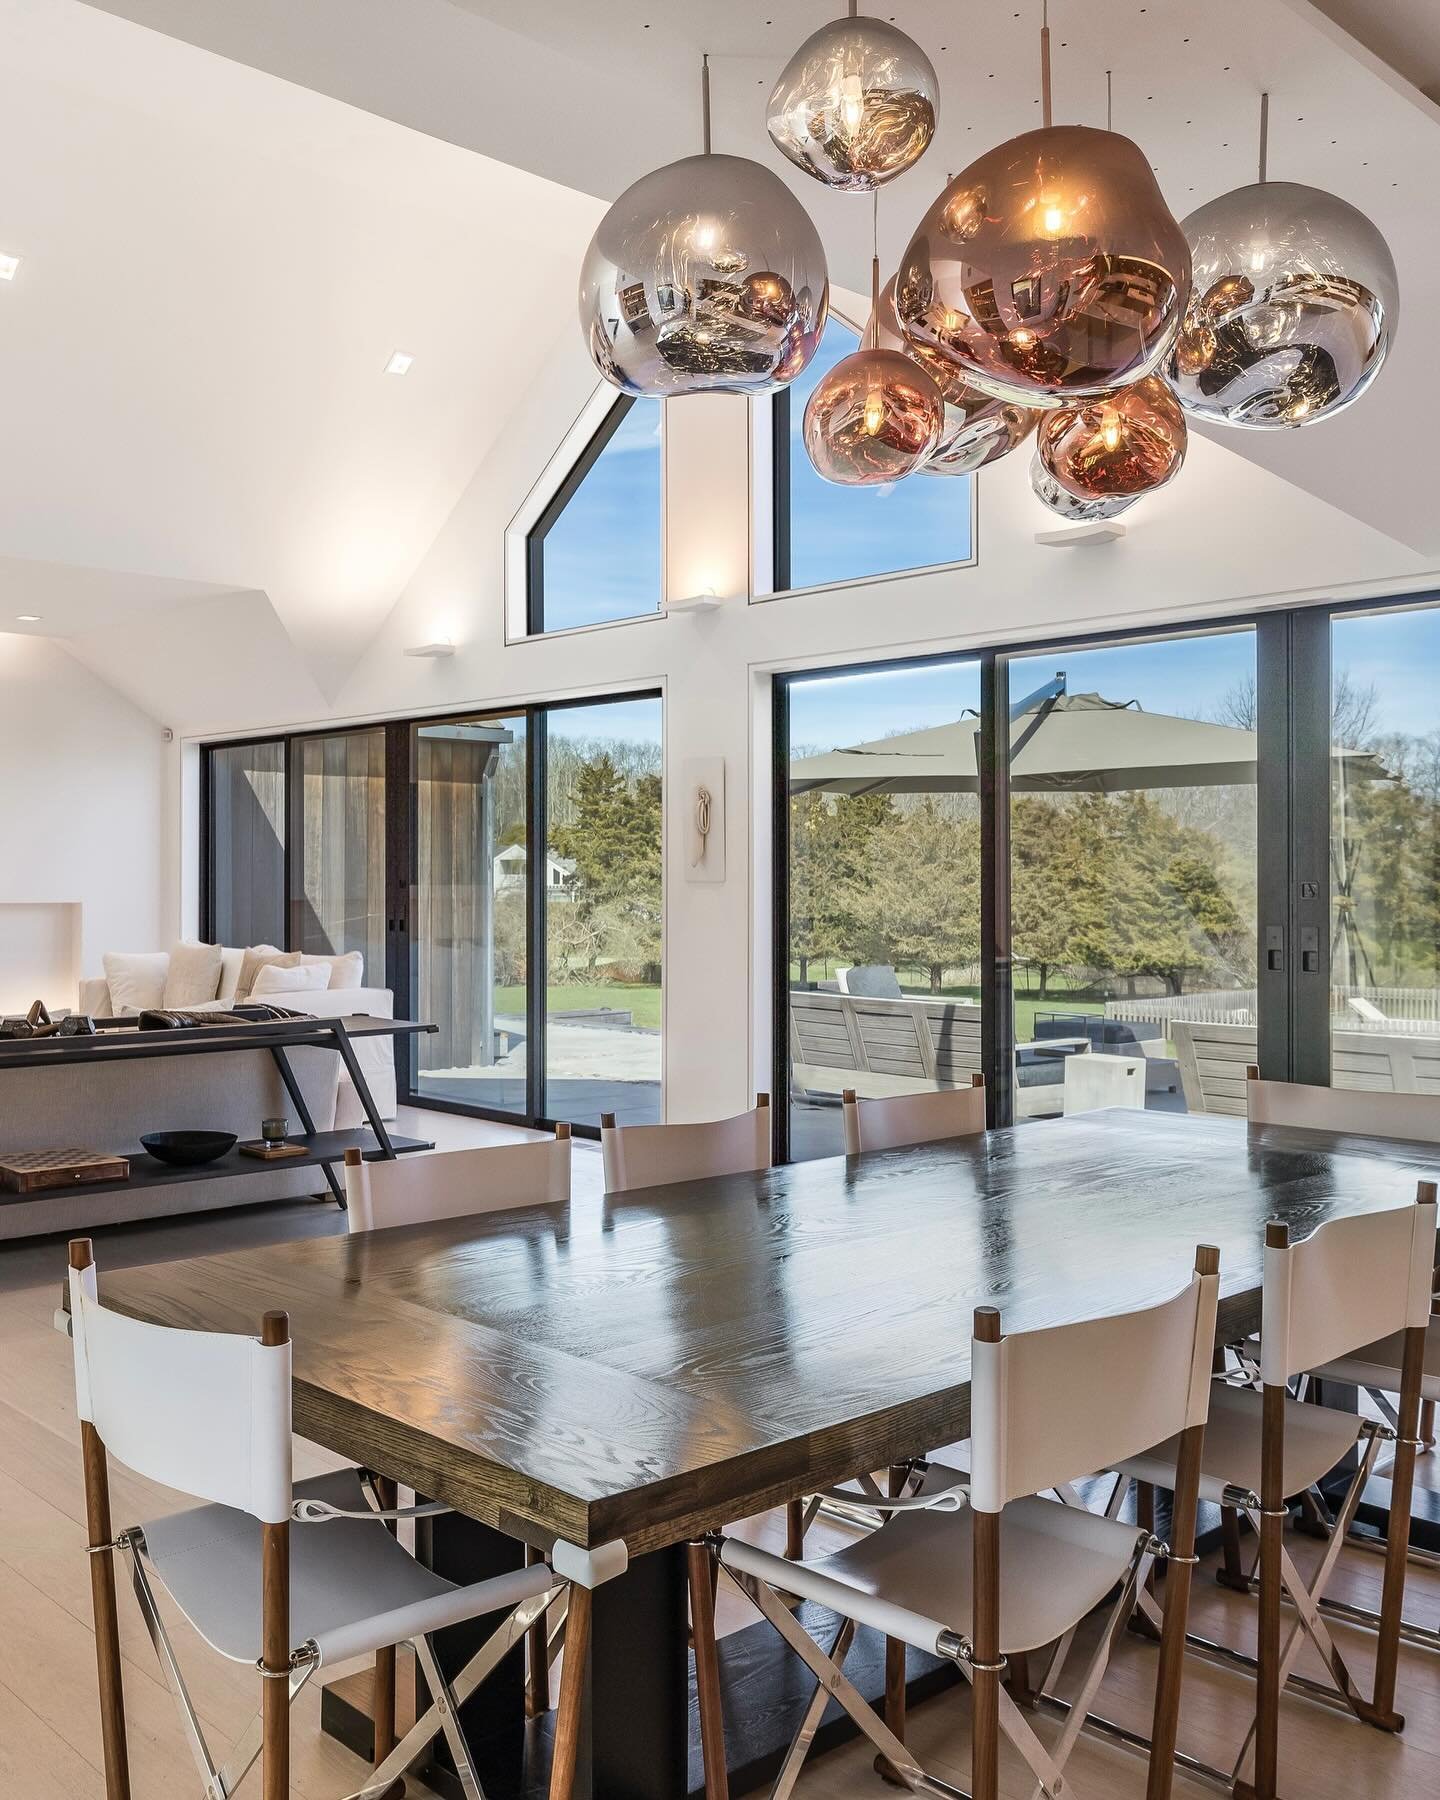 Sitting on a lush 1.7 acres this light filled home epitomizes contemporary elegance.

Inspired by John Pawson, the home has been thoughtfully designed with an open-concept layout accentuating the minimalist aesthetic.

6 bedrooms and 6.5 bathrooms

4